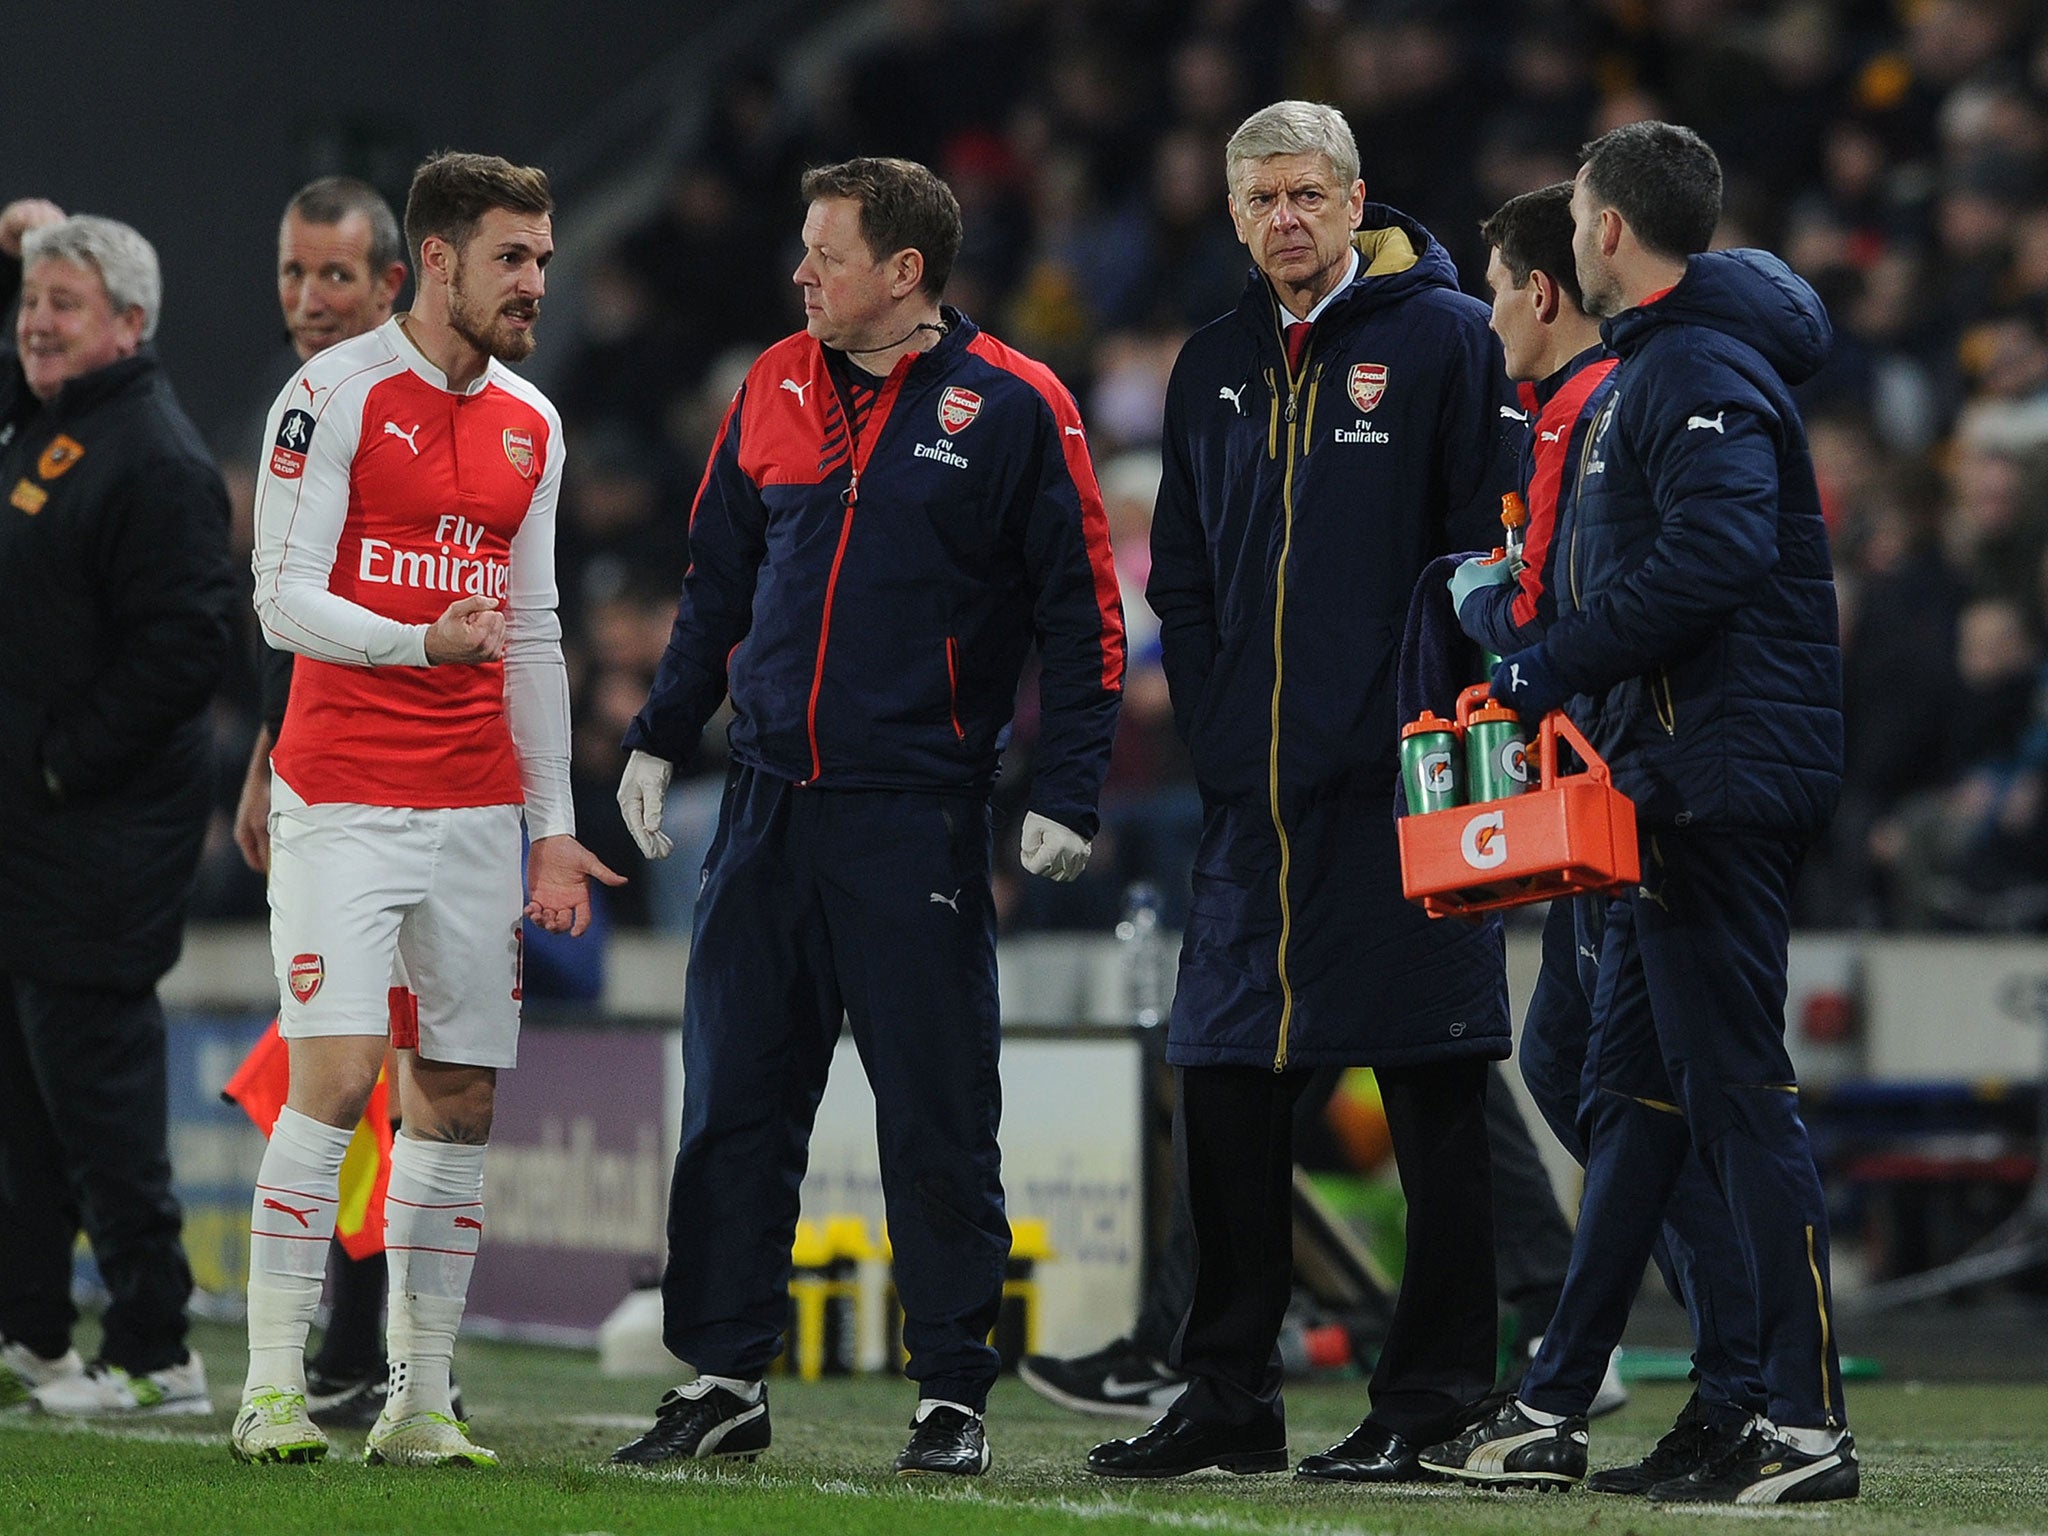 Aaron Ramsey was forced off 16 minutes after coming on as a substitute